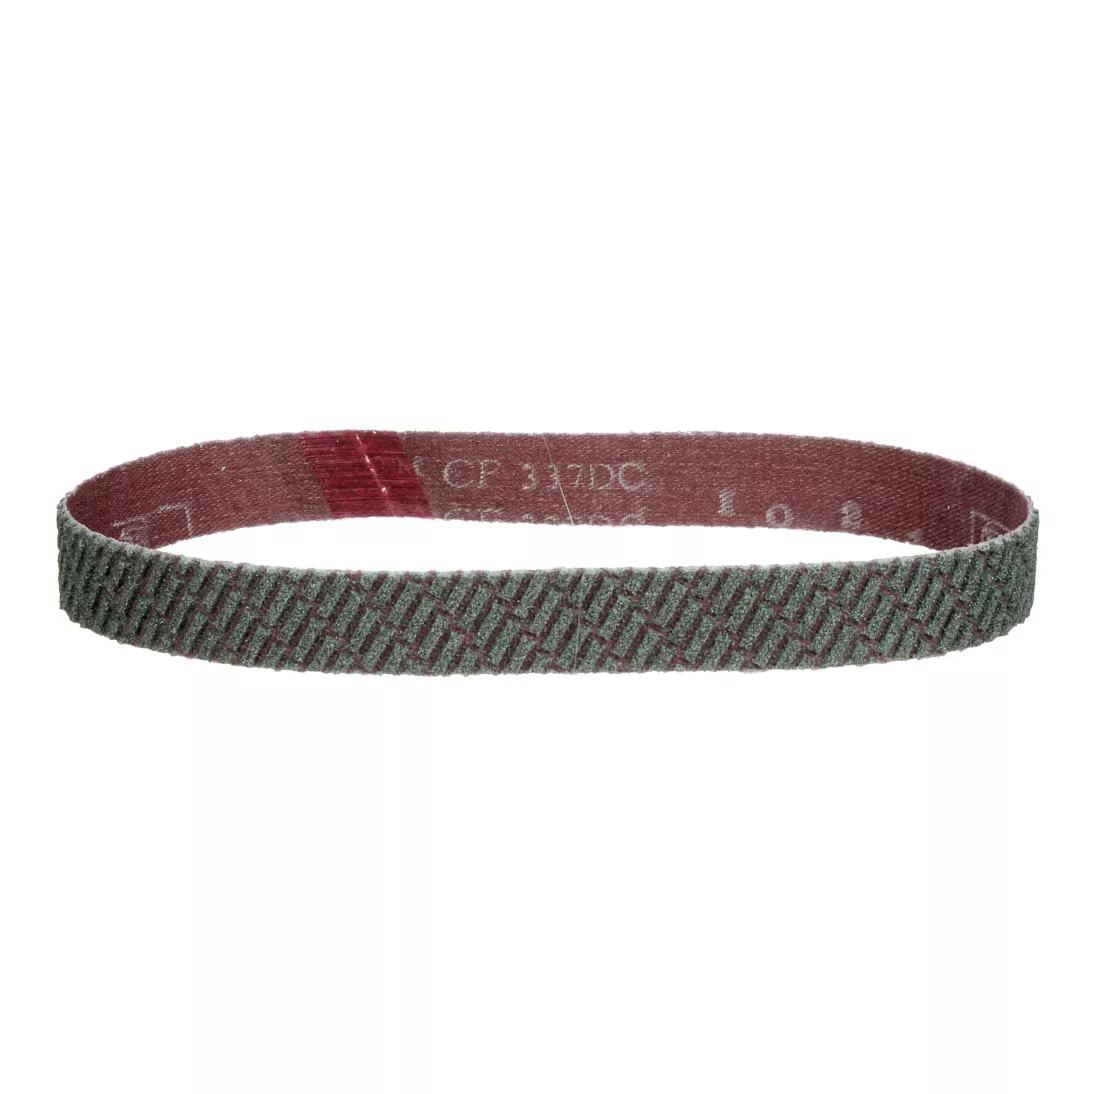 3M™ Trizact™ Cloth Belt 337DC, 1/2 in X 18 in A300 X-weight, 20 ea/Case